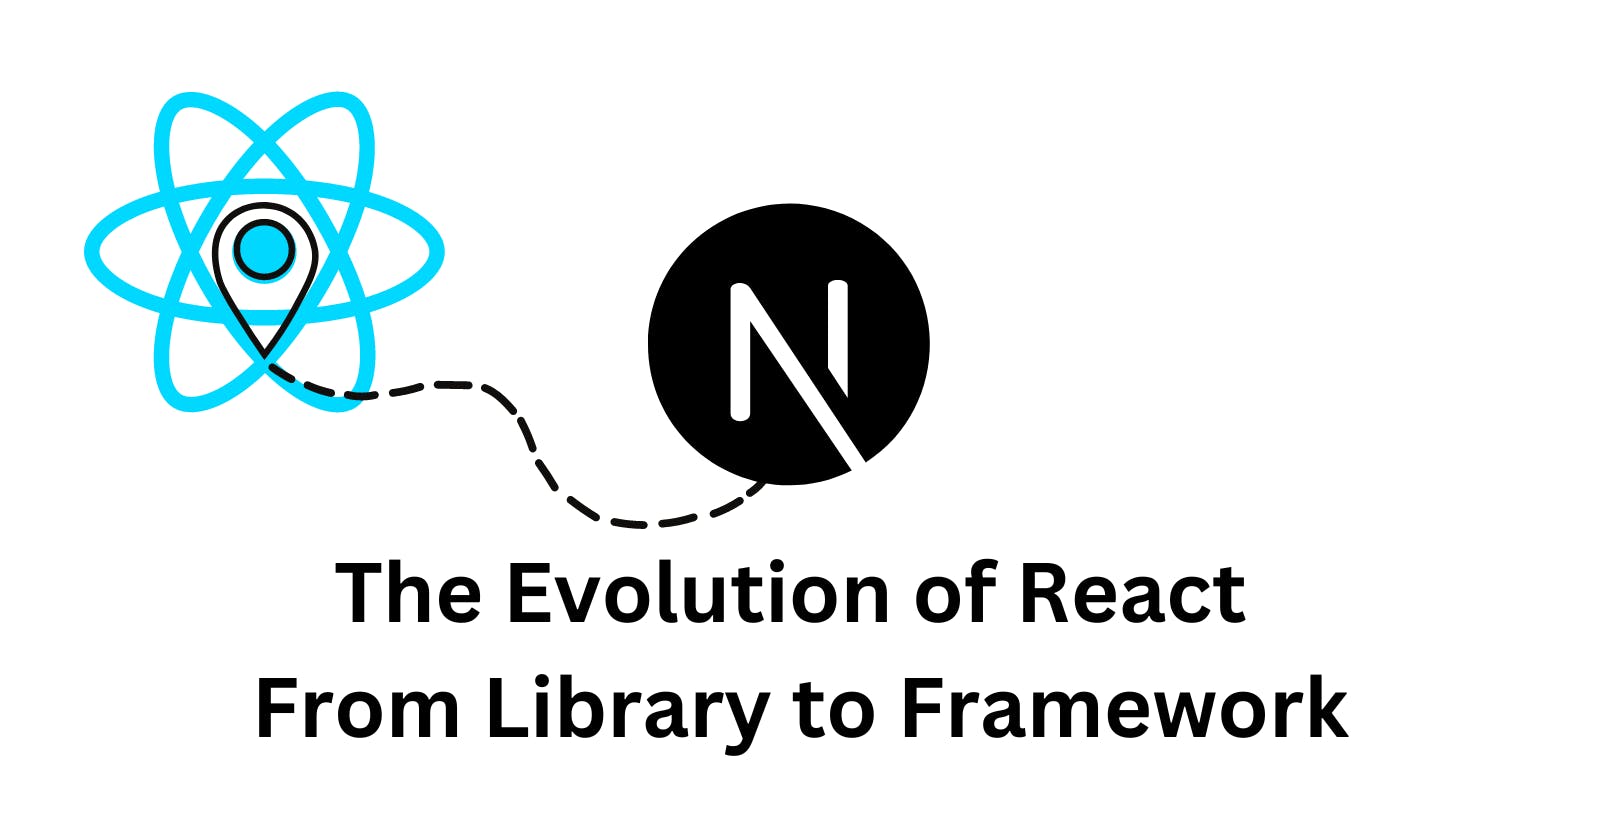 The Evolution of React